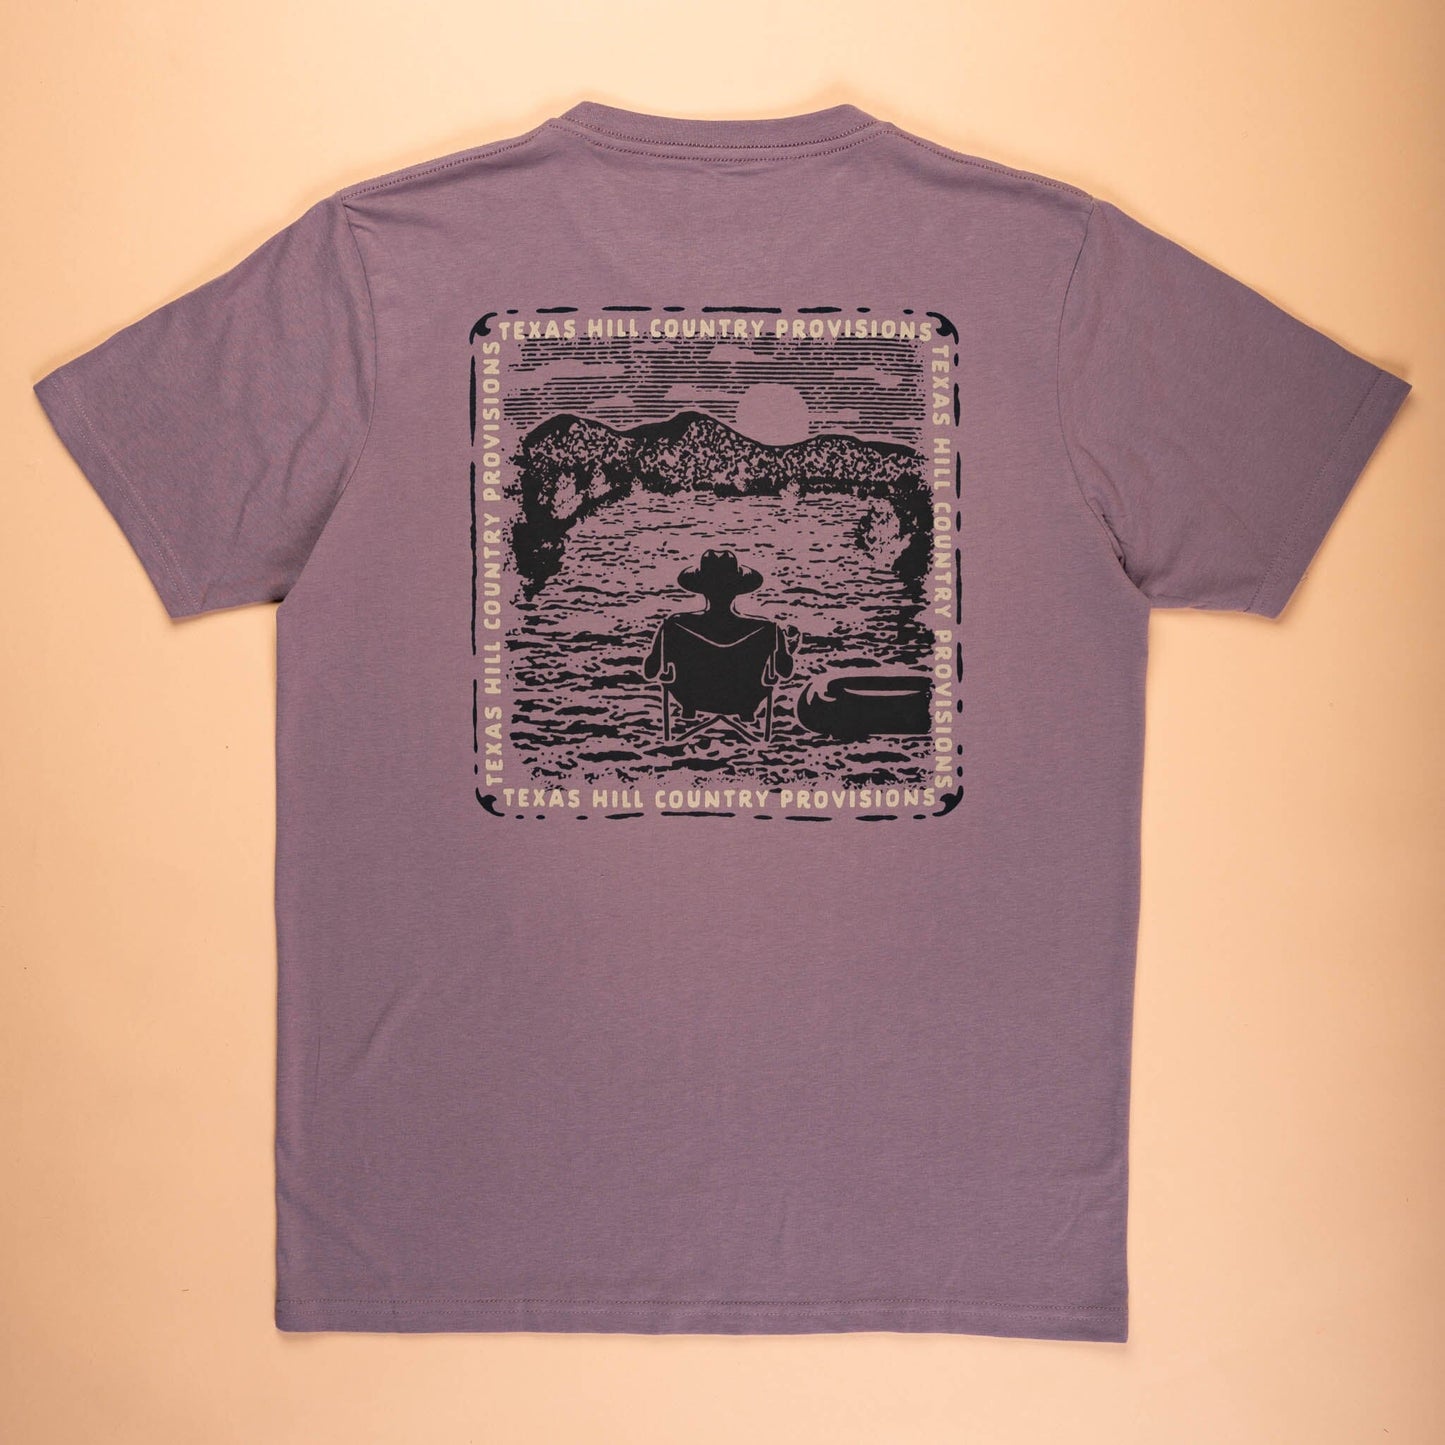 Fine n' Dandy Feather Grass Tee Texas Hill Country Provisions Purple Haze S 